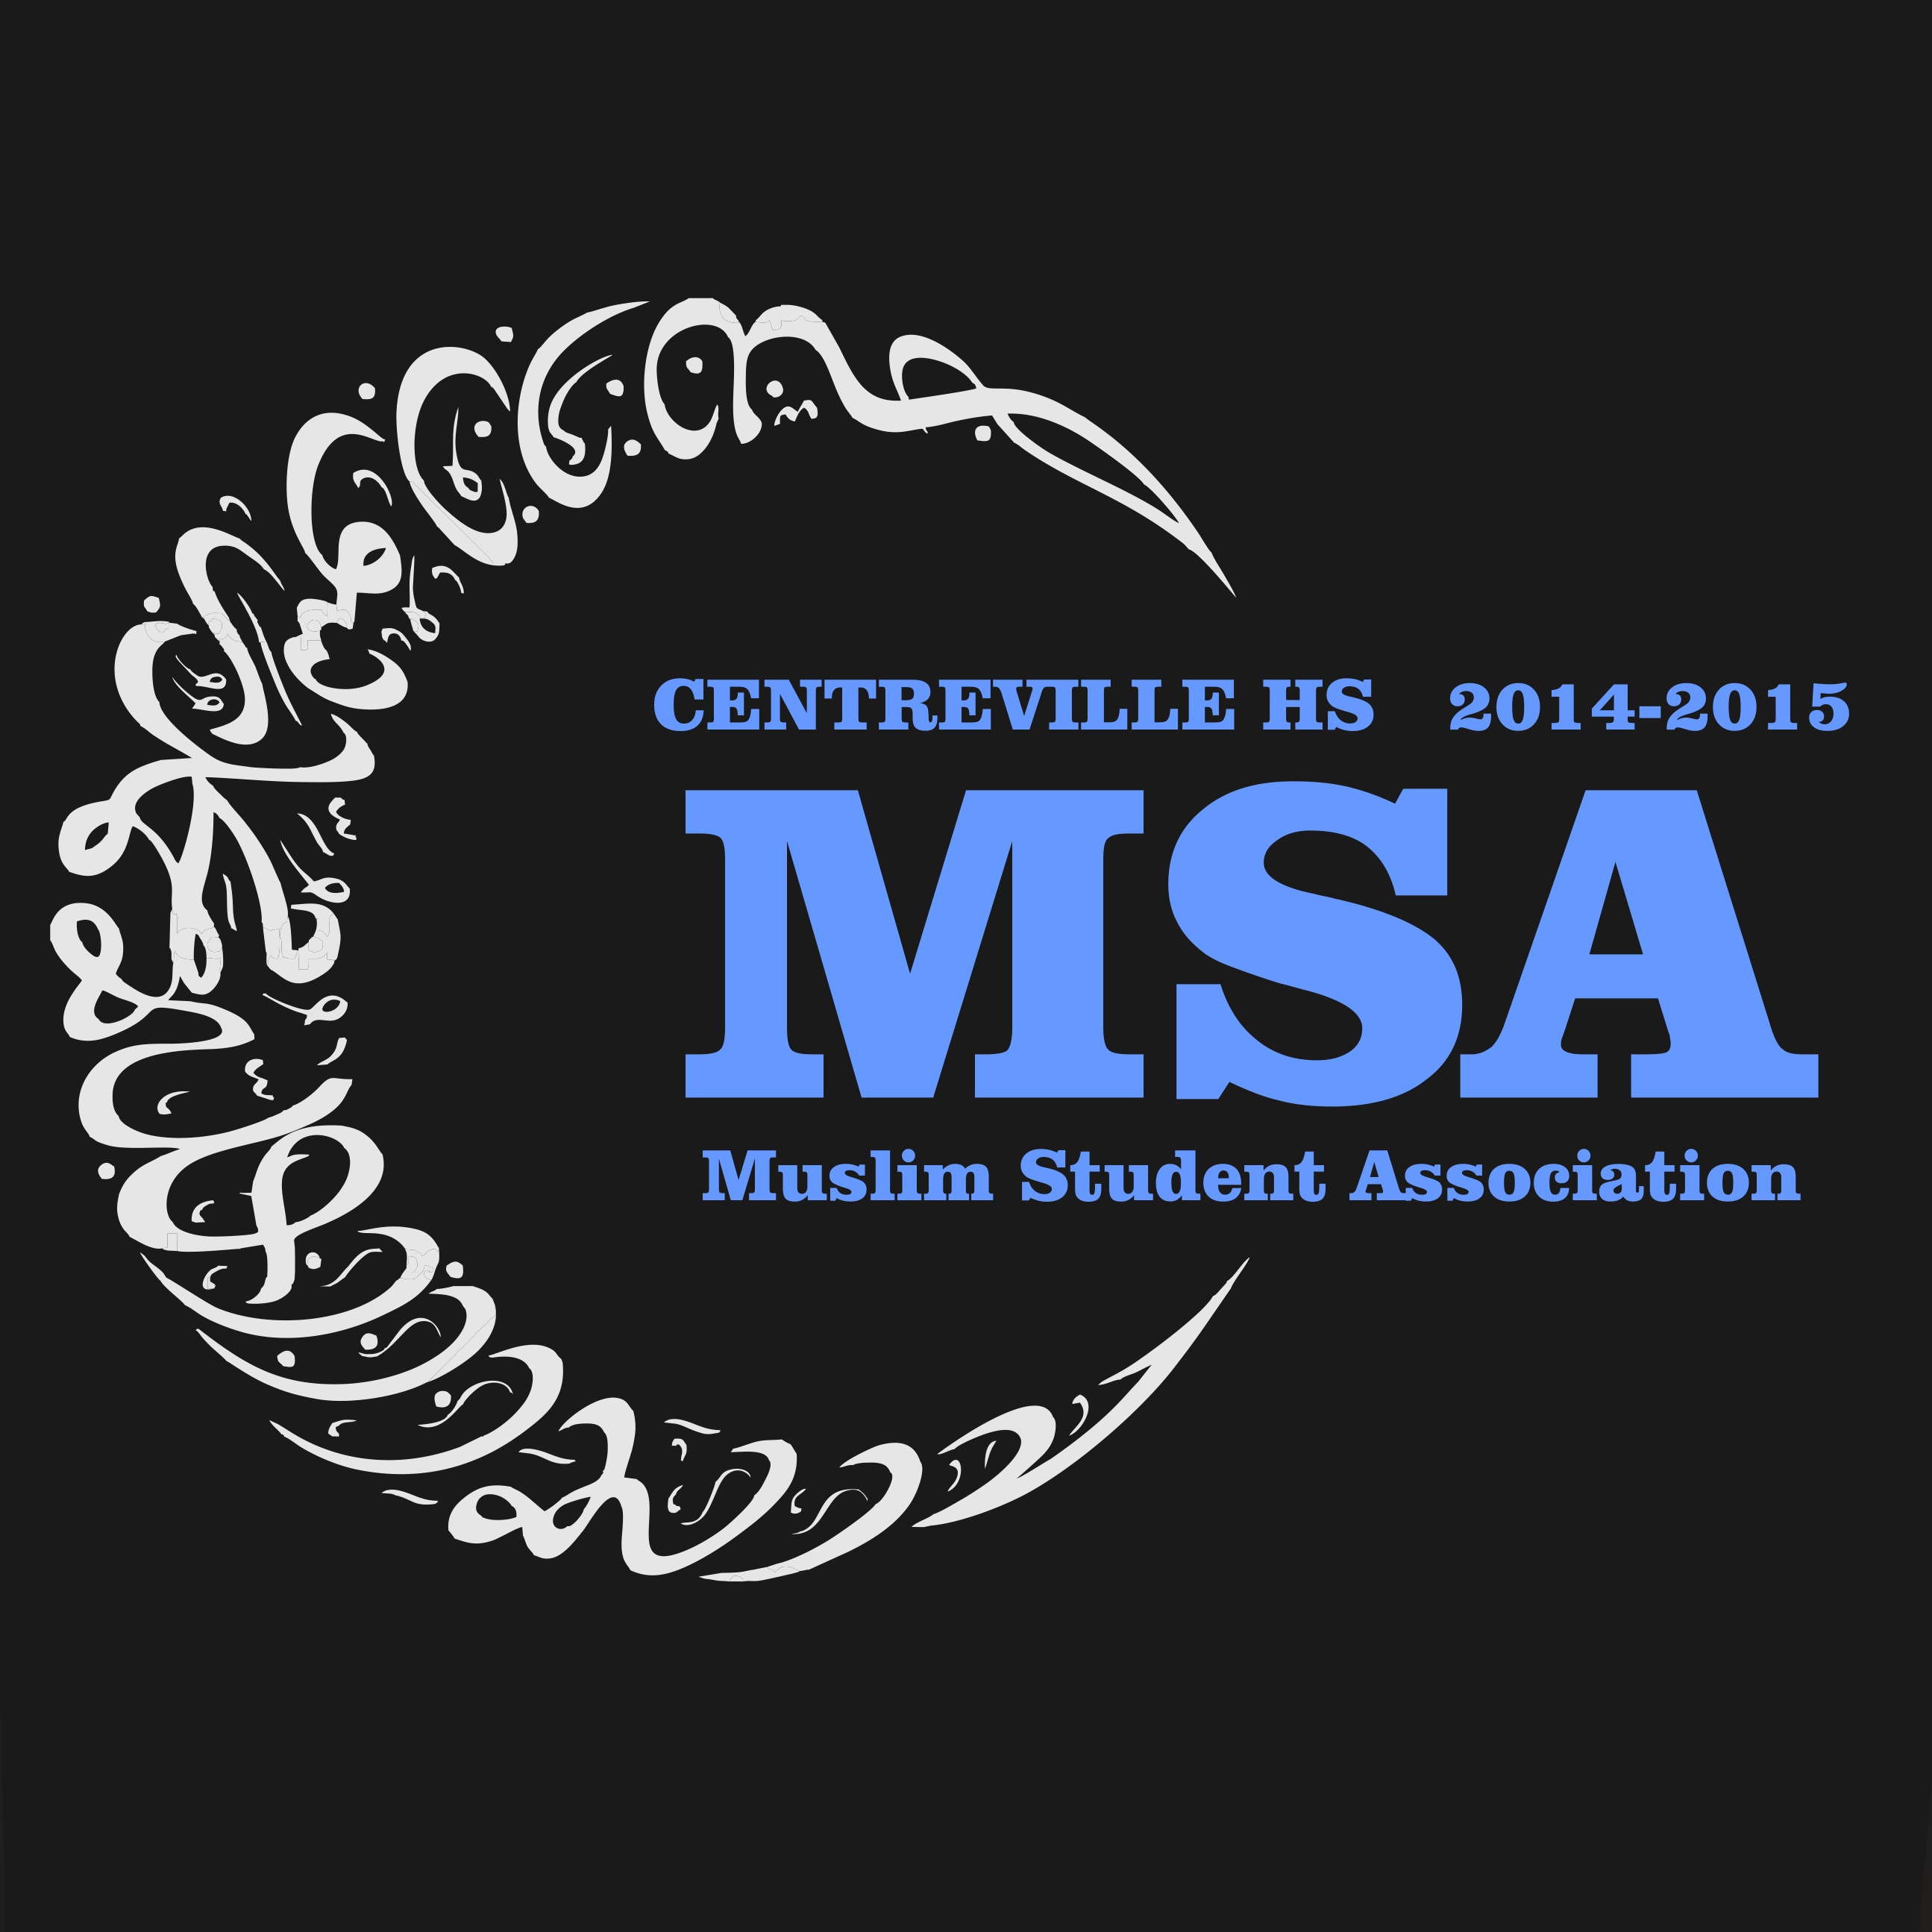 The official twitter page of the Centreville High School's Muslim Student Association